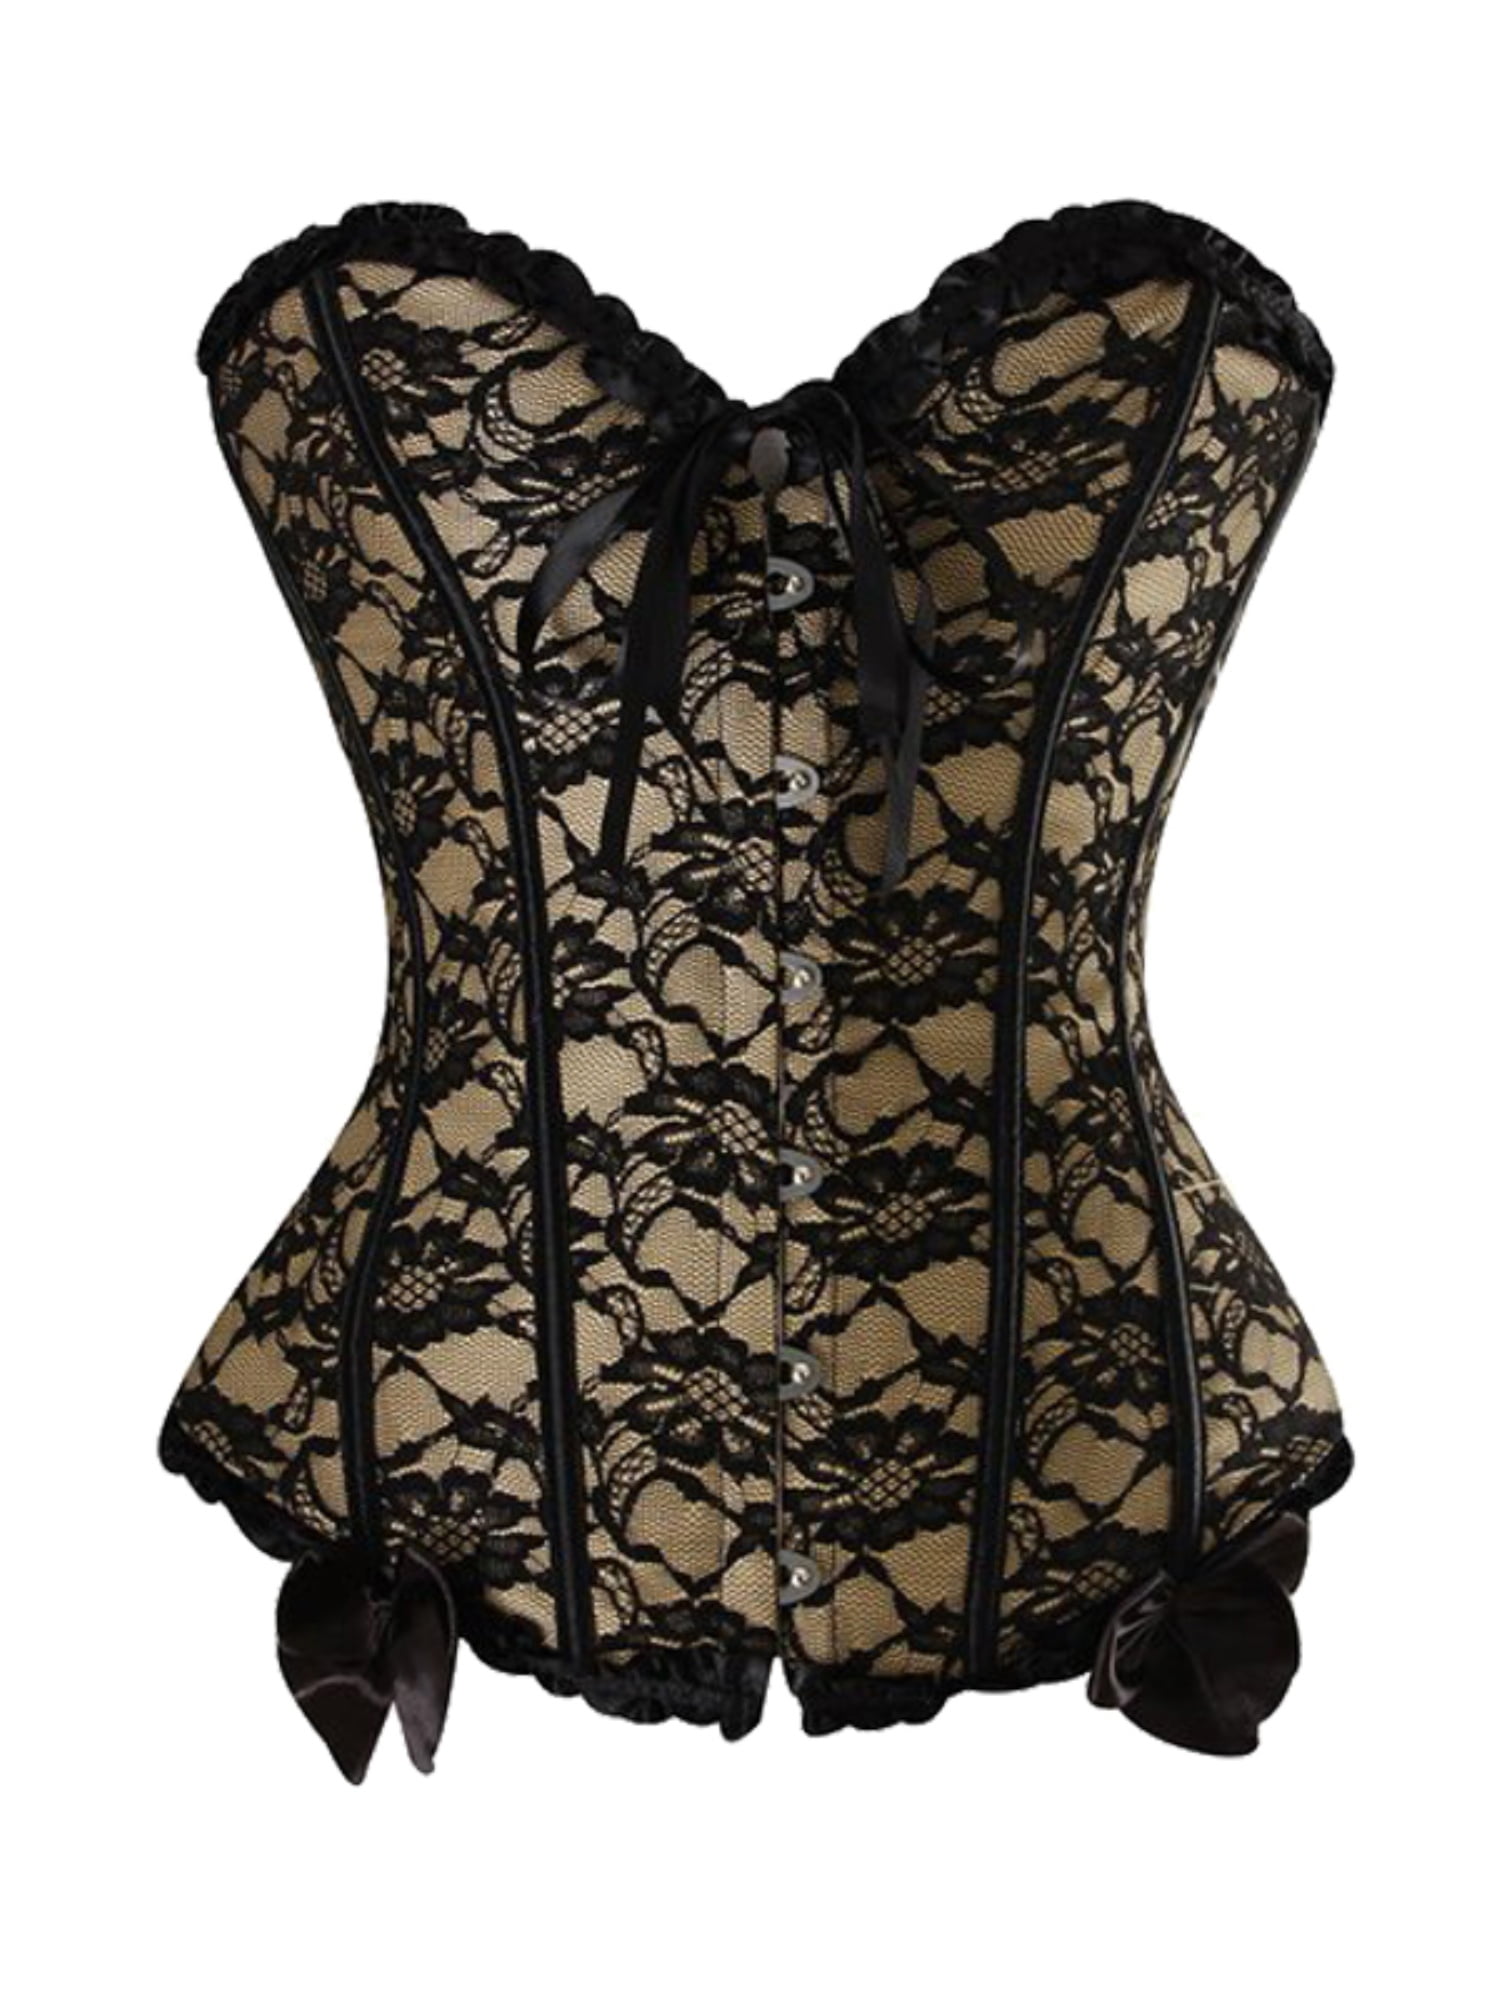 Guide to sexy corsets: women's bustiers, lingerie corsets, laced tight corsets